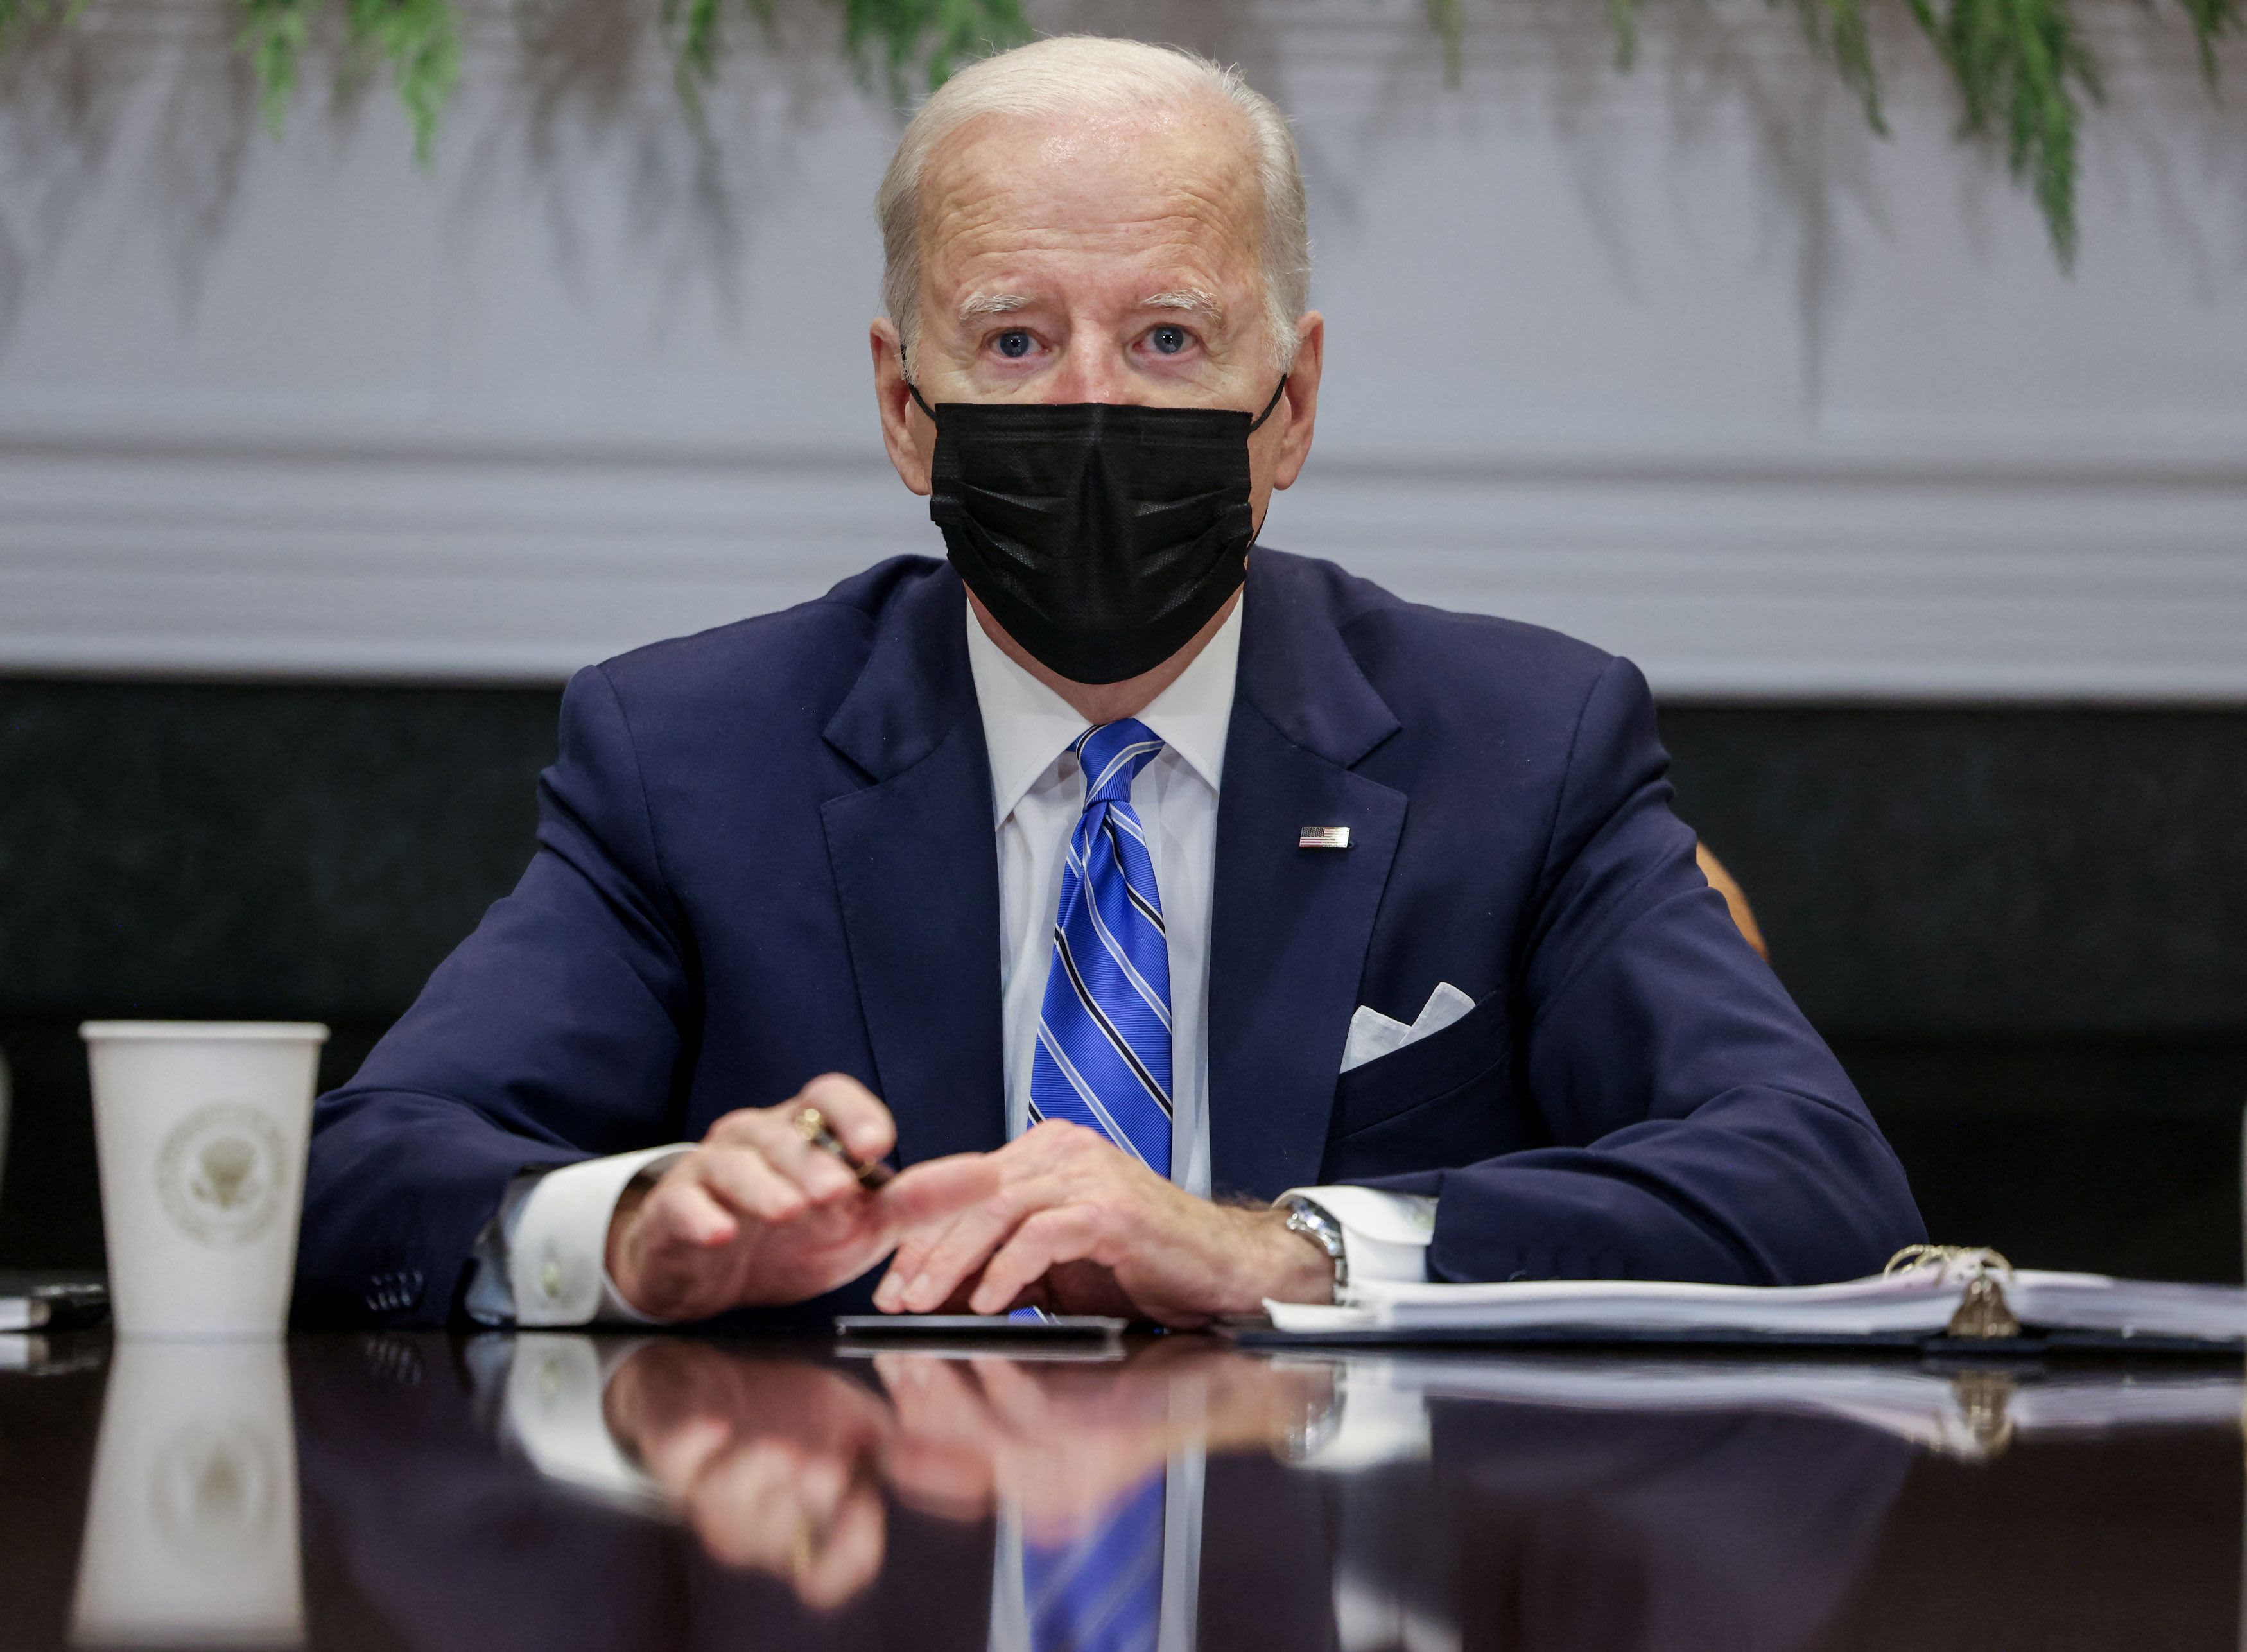 Biden tests negative for Covid after having close contact with aide who contracted virus